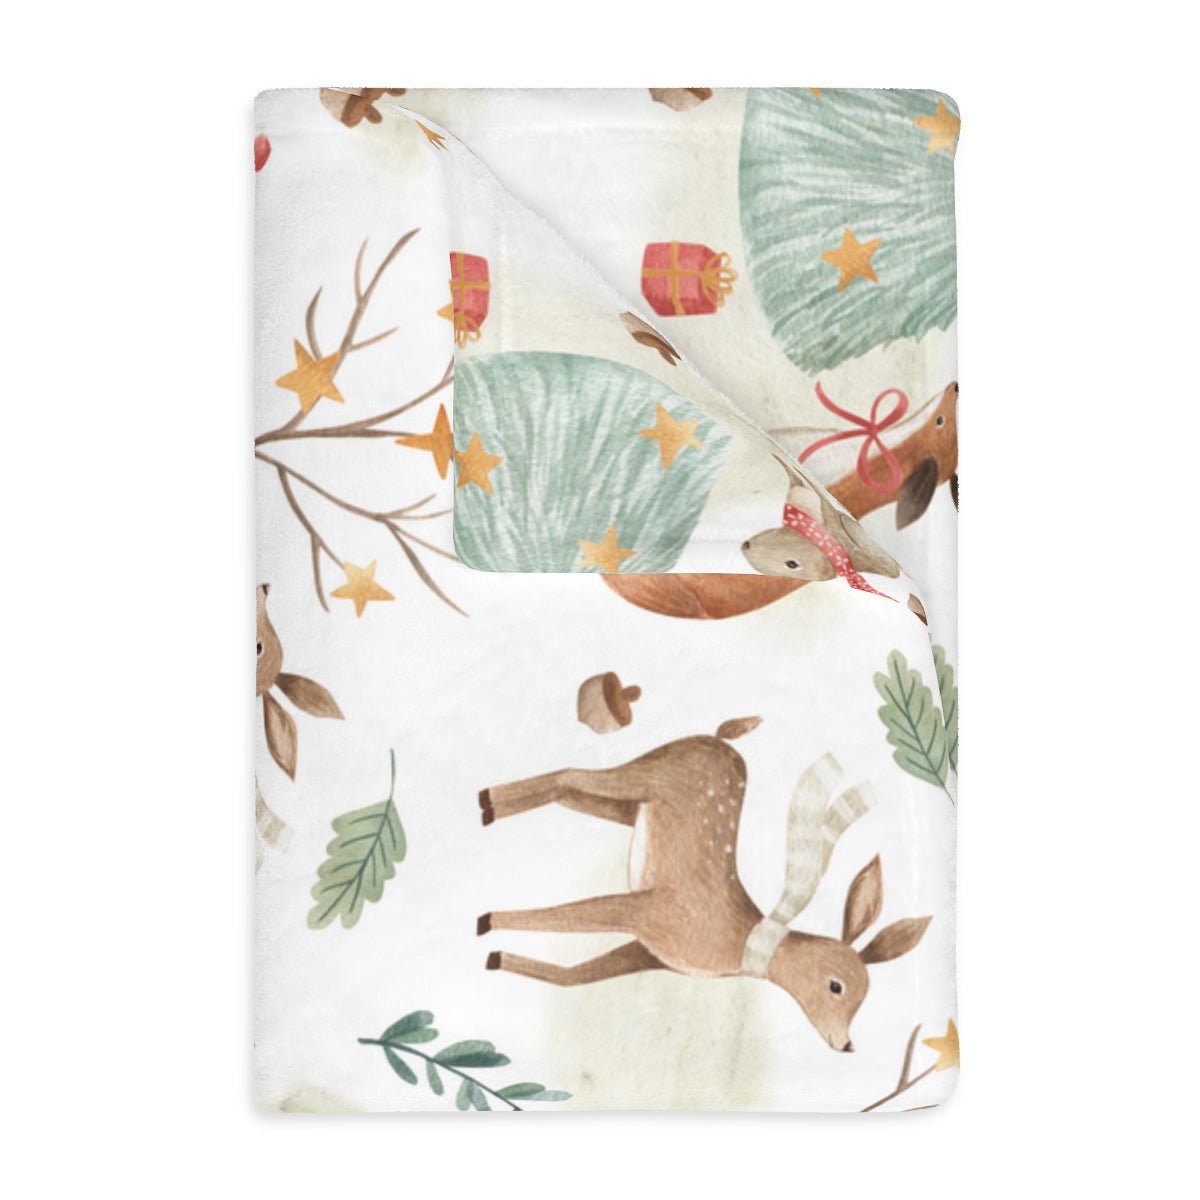 Christmas Woodland Animals Velveteen Minky Blanket (Two-sided print) - Puffin Lime